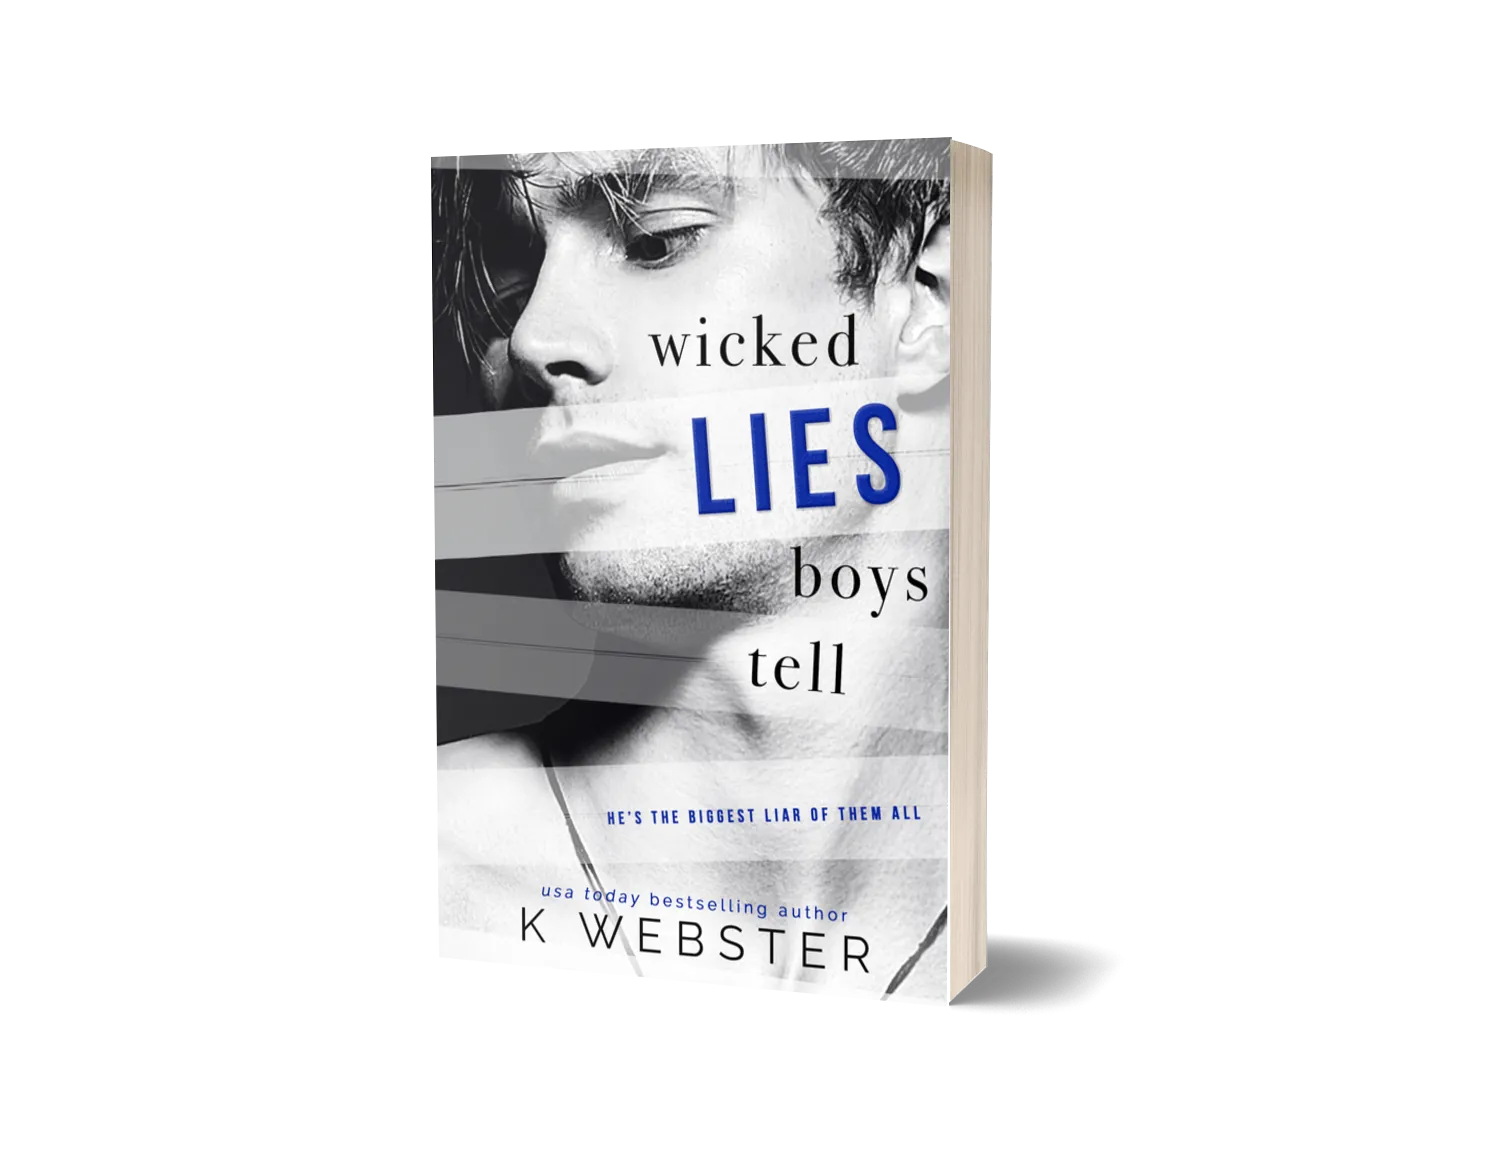 Wicked Lies Boys Tell book cover